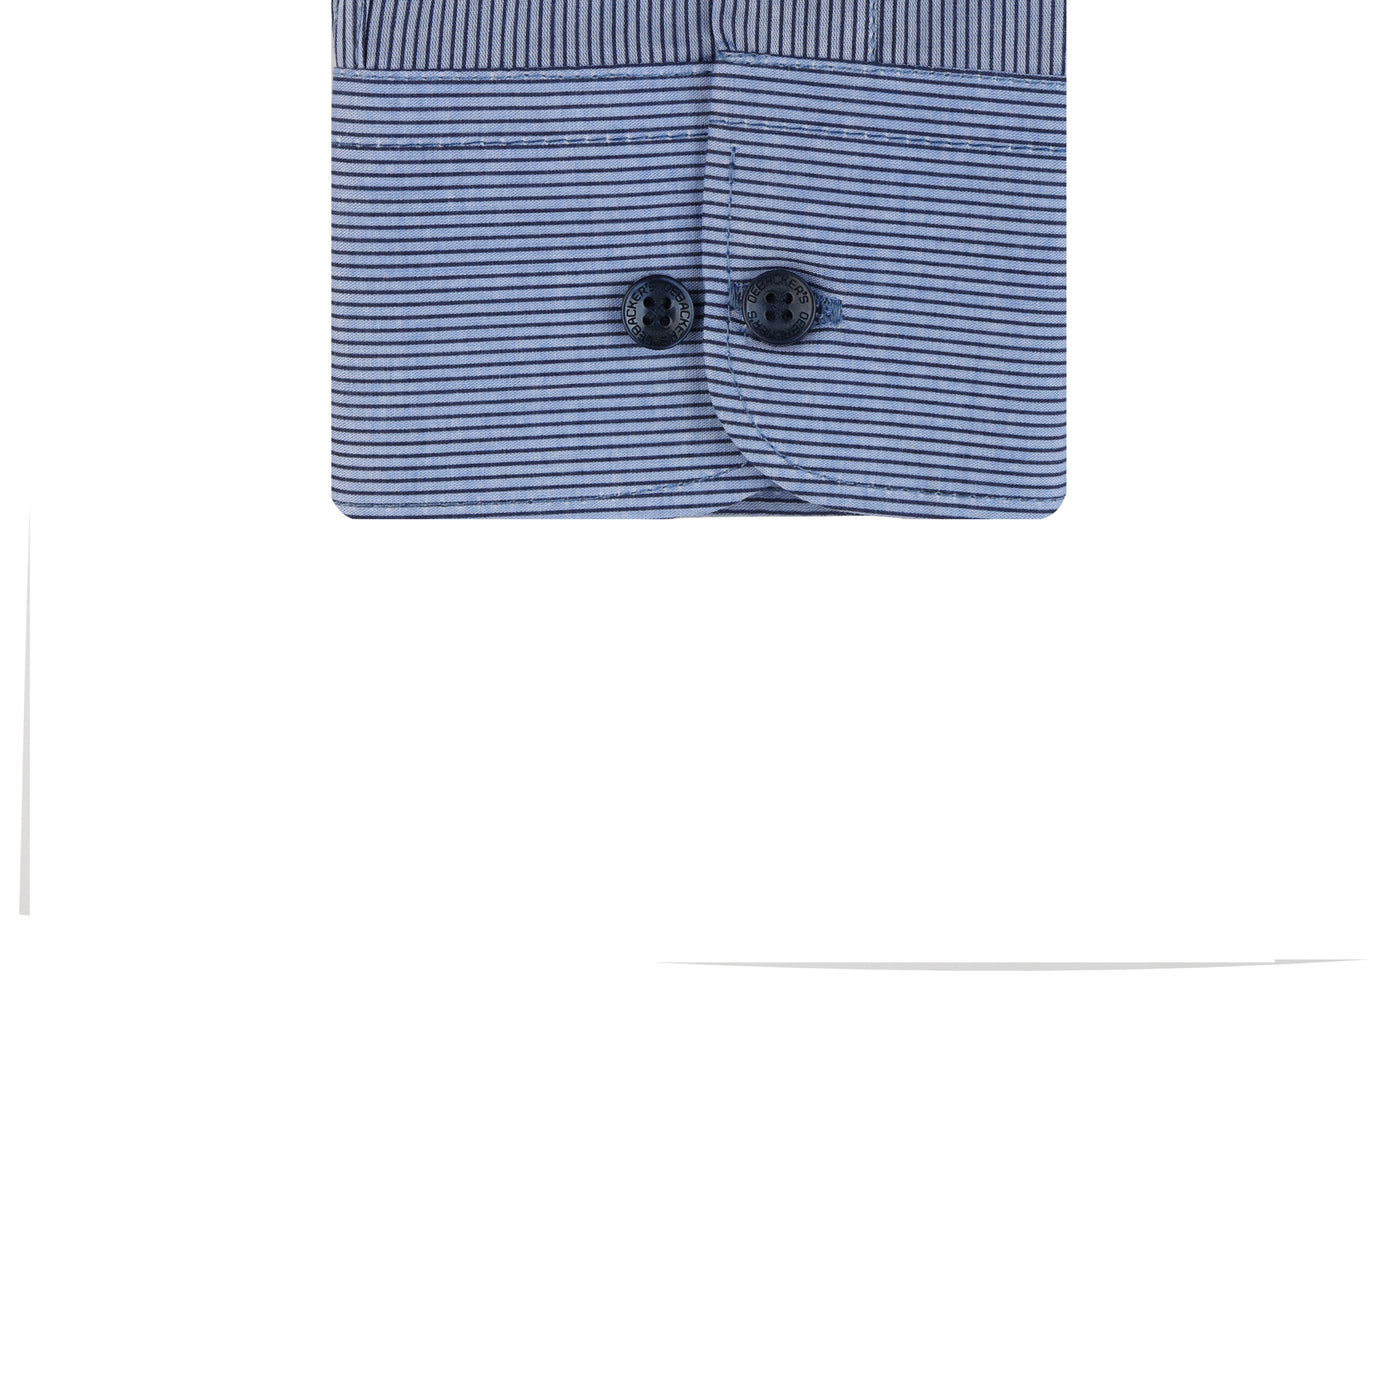 Light Navy and Black striped Casual Shirt